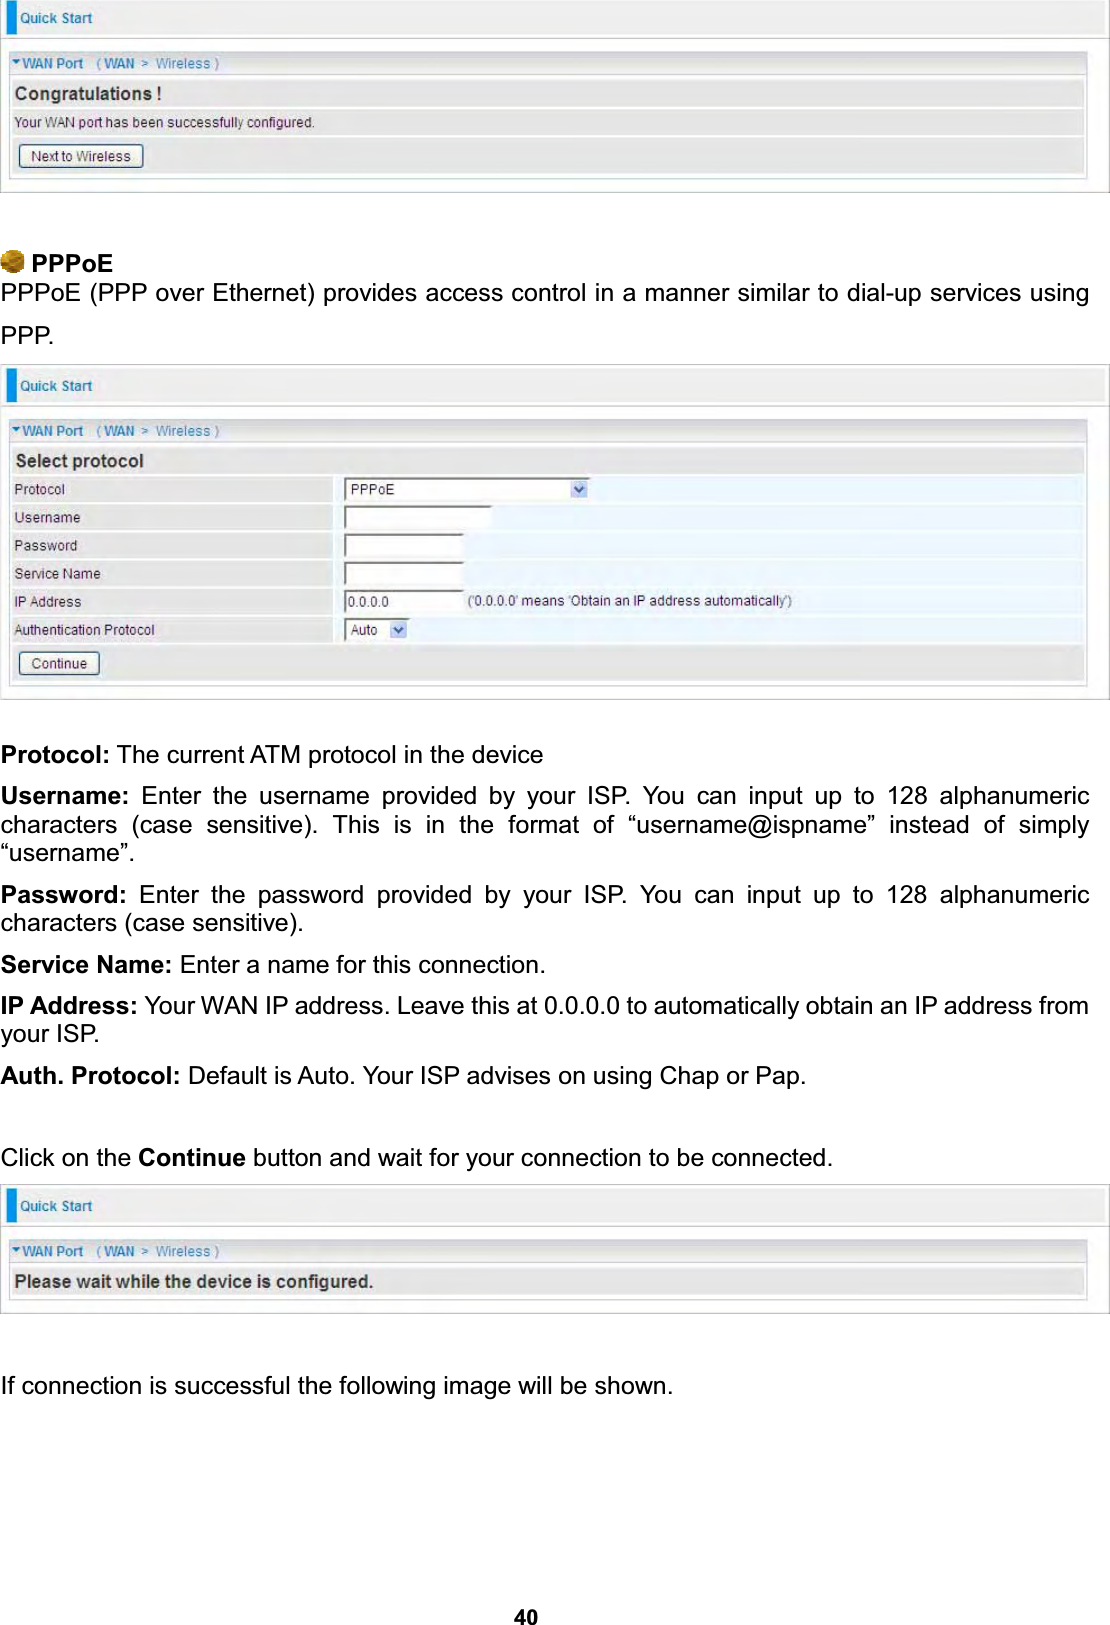  40     PPPoE PPPoE (PPP over Ethernet) provides access control in a manner similar to dial-up services using PPP.   Protocol: The current ATM protocol in the device  Username: Enter the username provided by your ISP. You can input up to 128 alphanumeric characters (case sensitive). This is in the format of “username@ispname” instead of simply “username”. Password: Enter the password provided by your ISP. You can input up to 128 alphanumeric characters (case sensitive). Service Name: Enter a name for this connection. IP Address: Your WAN IP address. Leave this at 0.0.0.0 to automatically obtain an IP address from your ISP.  Auth. Protocol: Default is Auto. Your ISP advises on using Chap or Pap.  Click on the Continue button and wait for your connection to be connected.    If connection is successful the following image will be shown. 